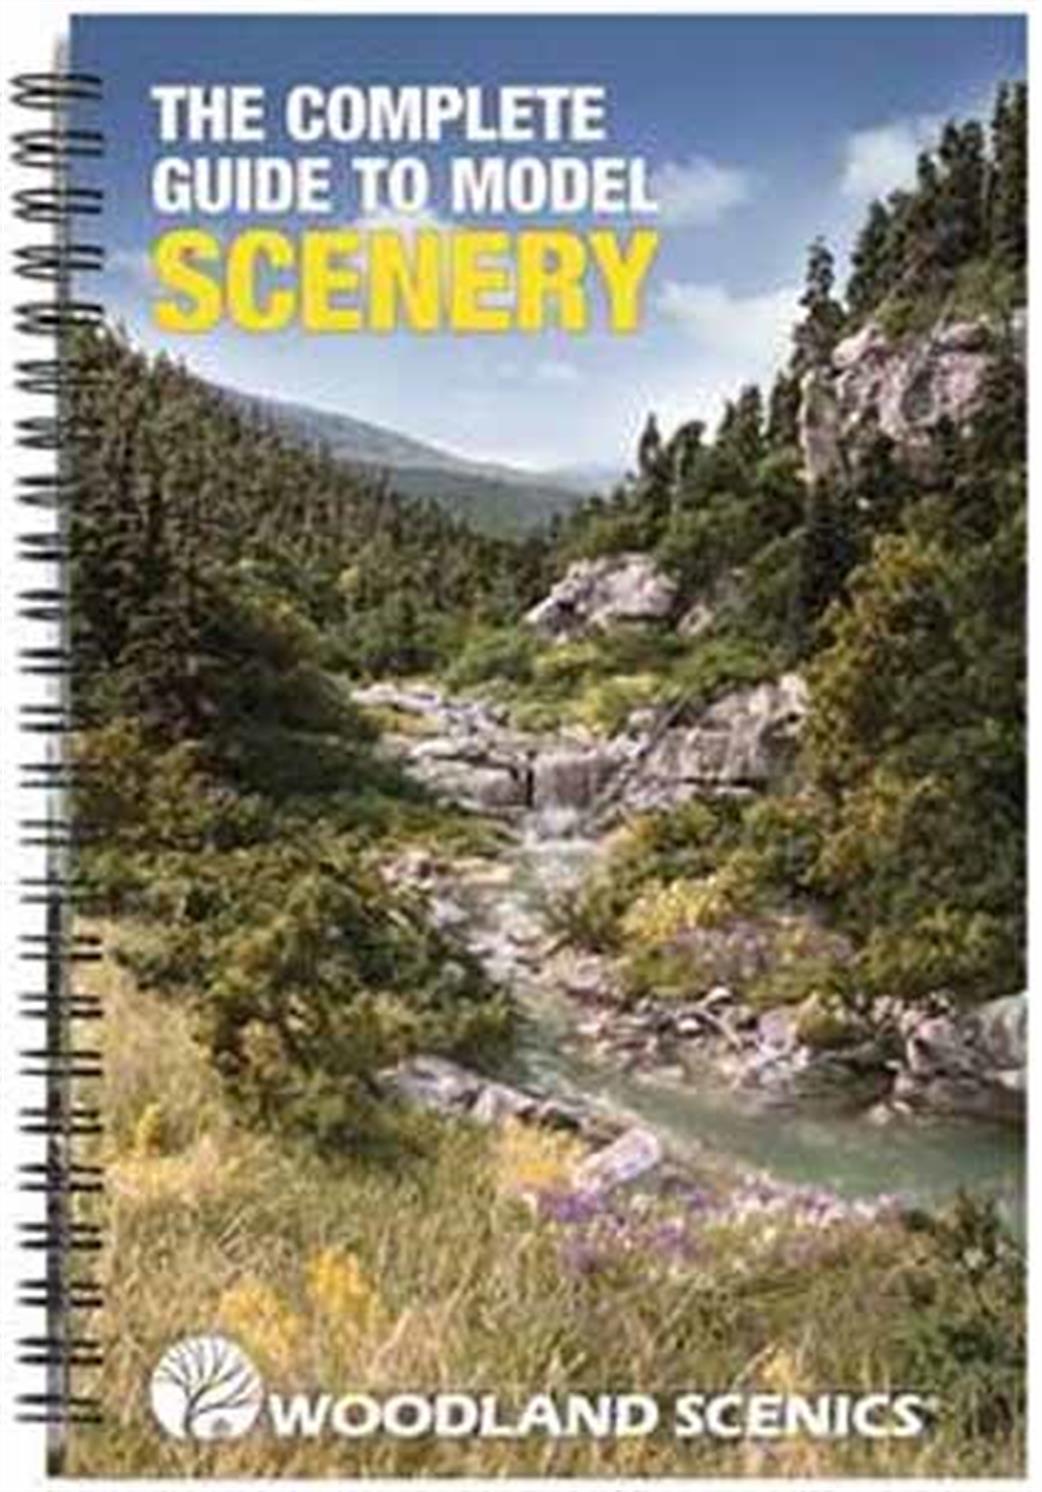 Woodland Scenics  C1208 The Complete Guide to Model Scenery